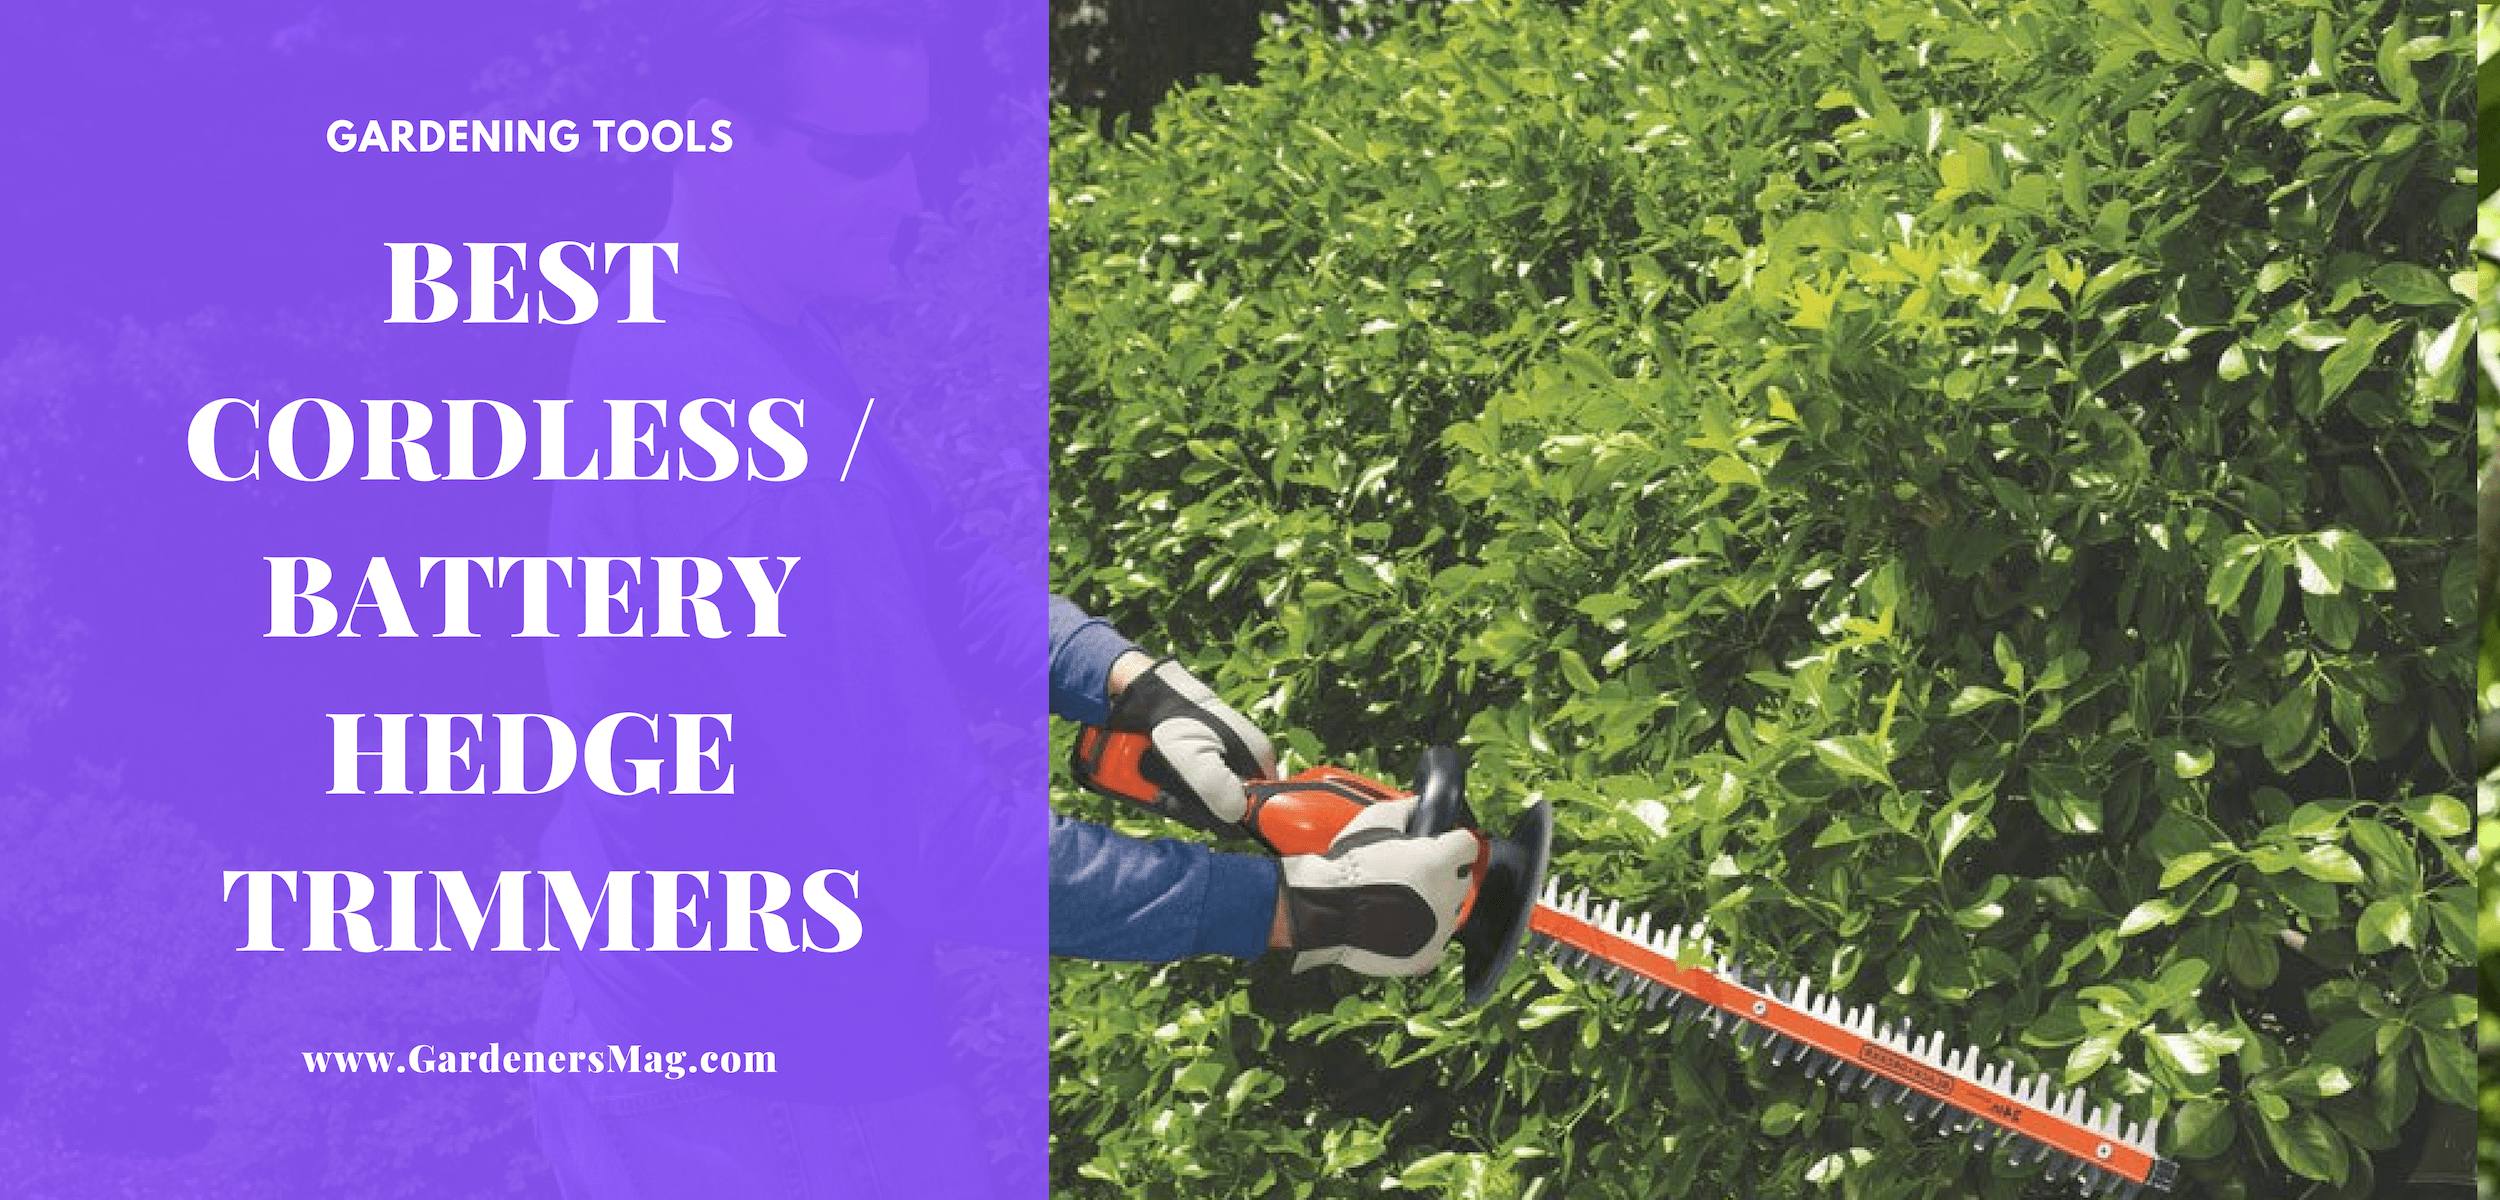 Best Cordless – Battery Hedge Trimmer